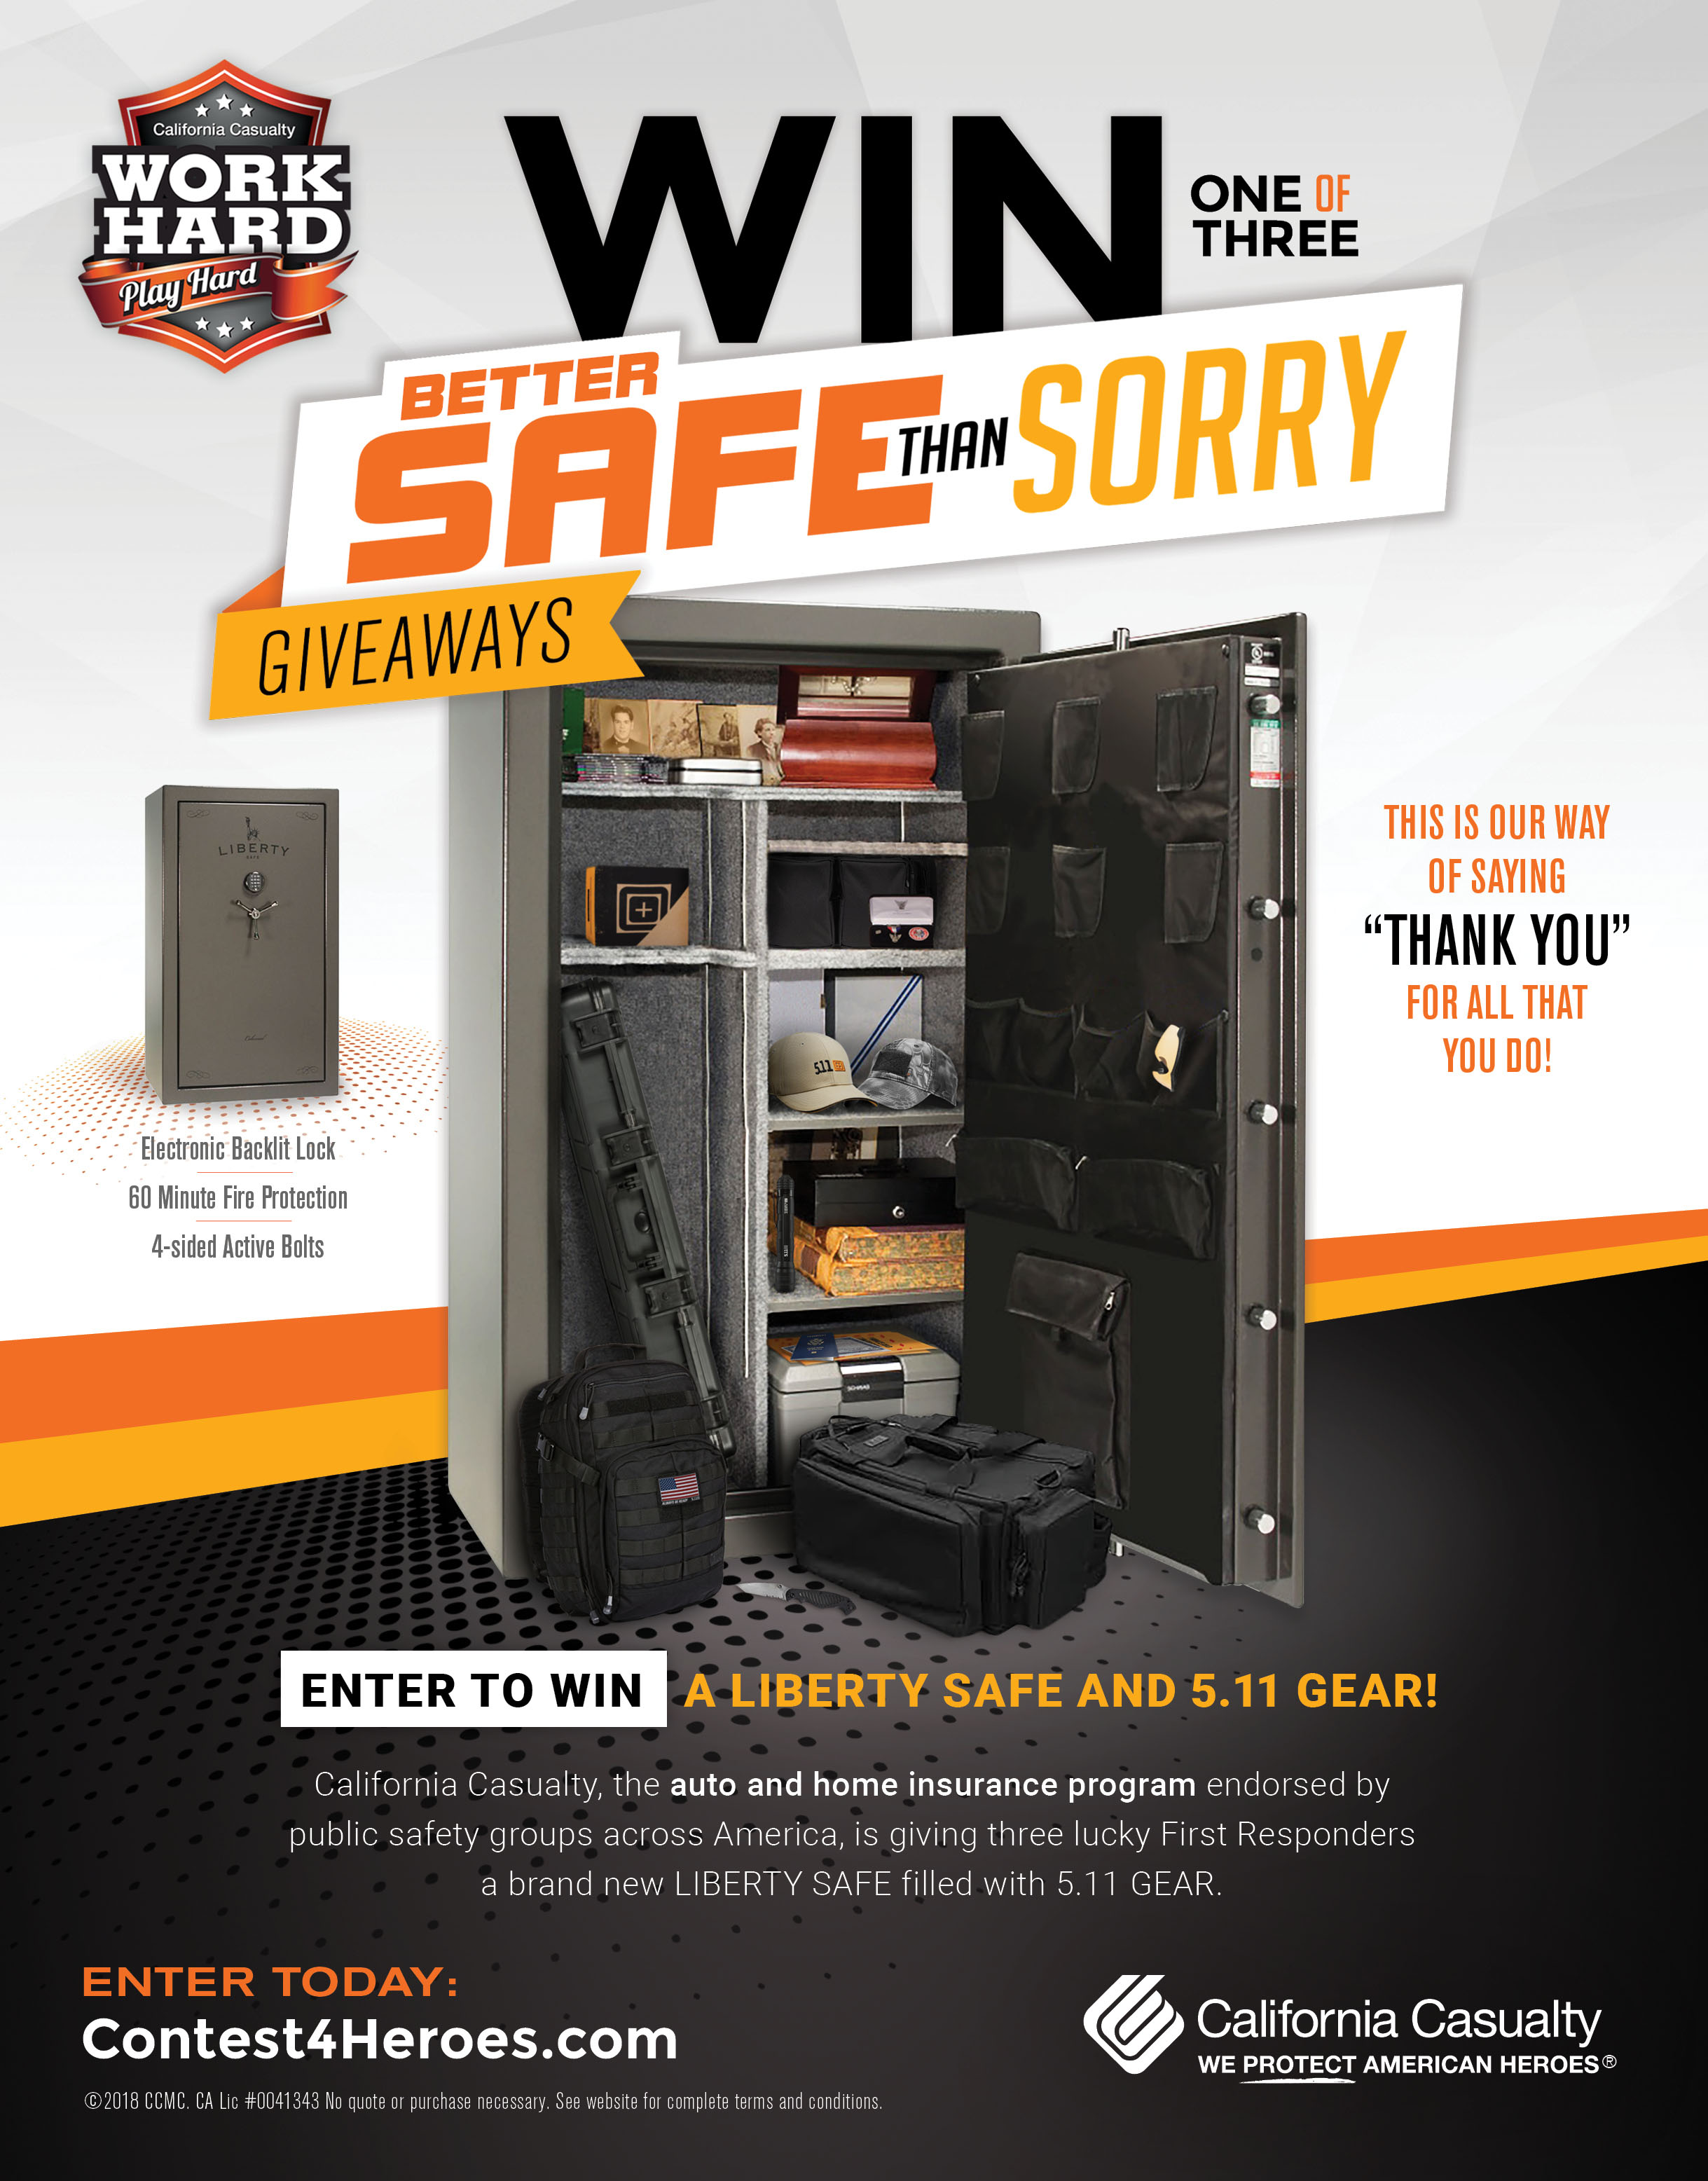 "Better Safe Than Sorry" Work Hard/Play Hard Sweepstakes